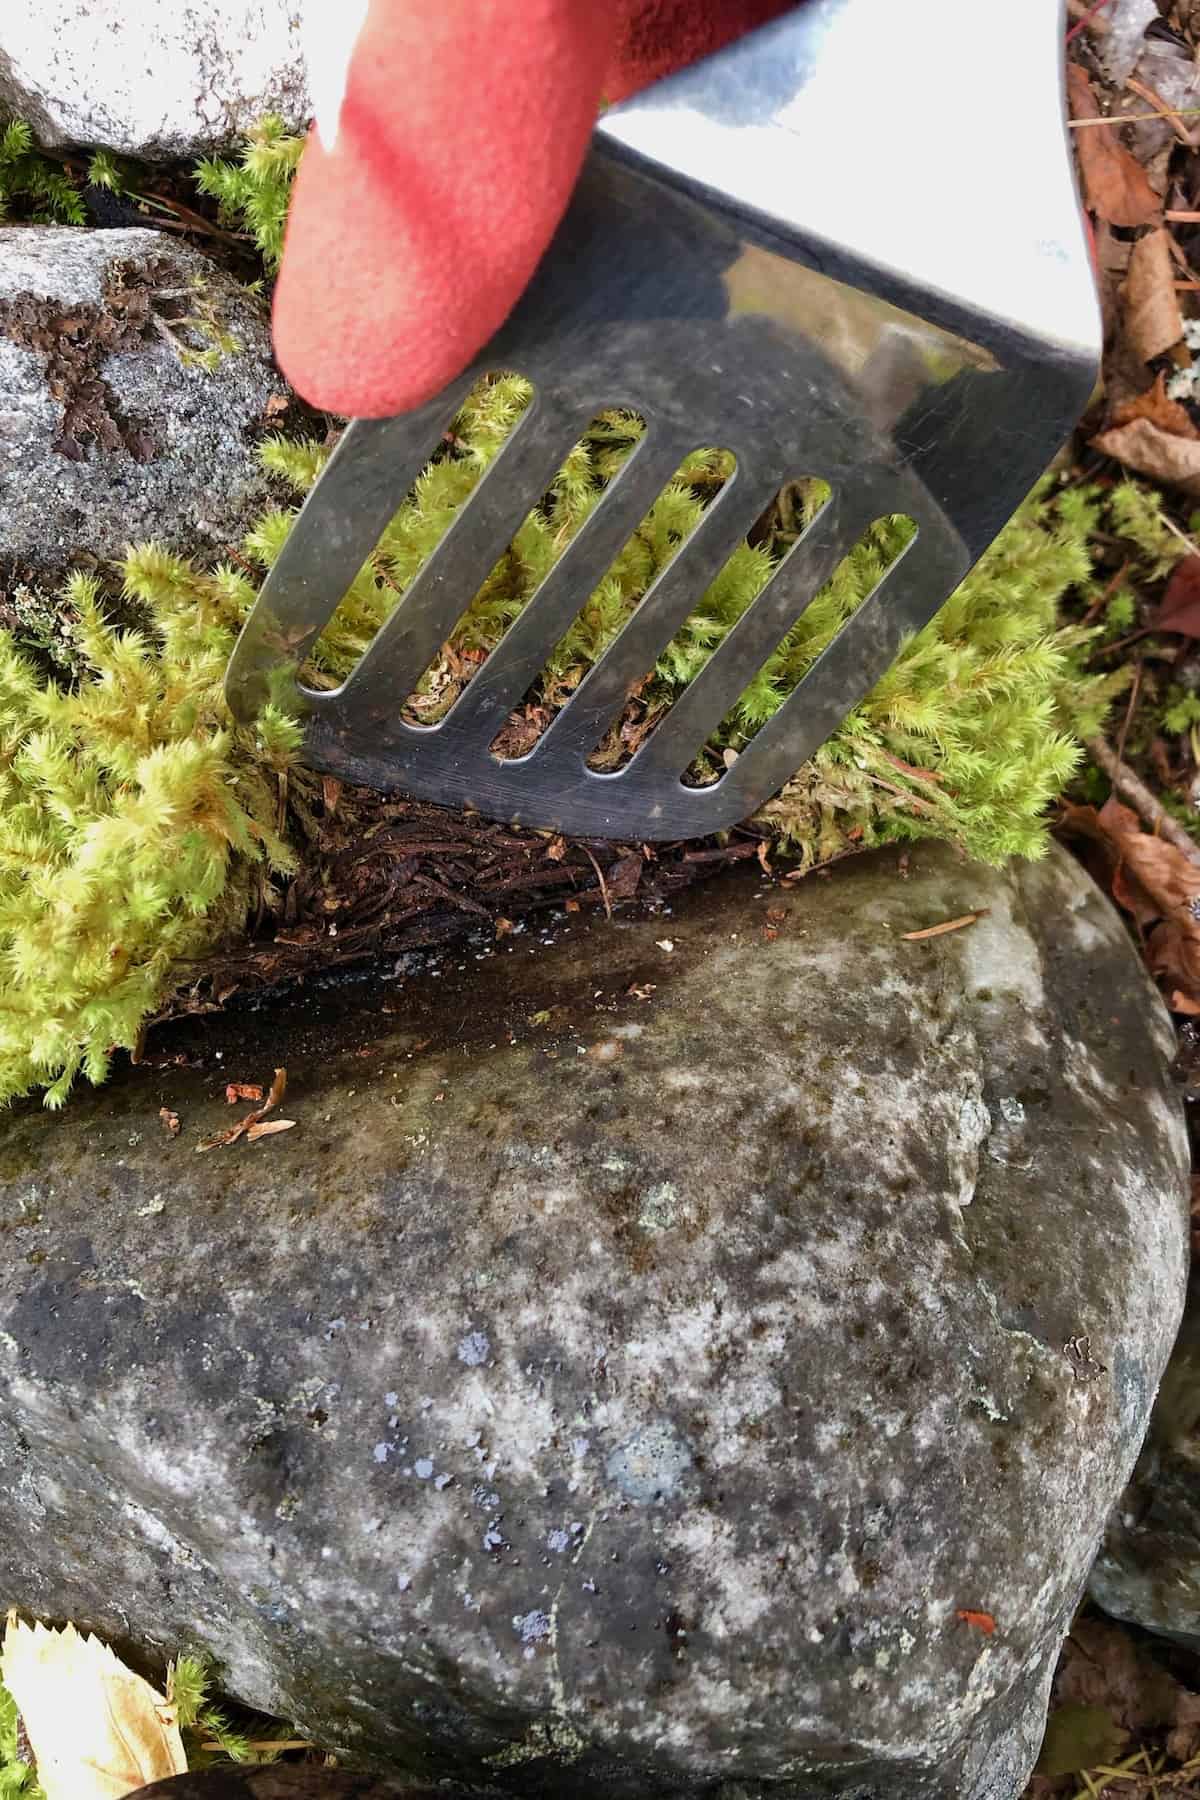 Prying off moss from a rock